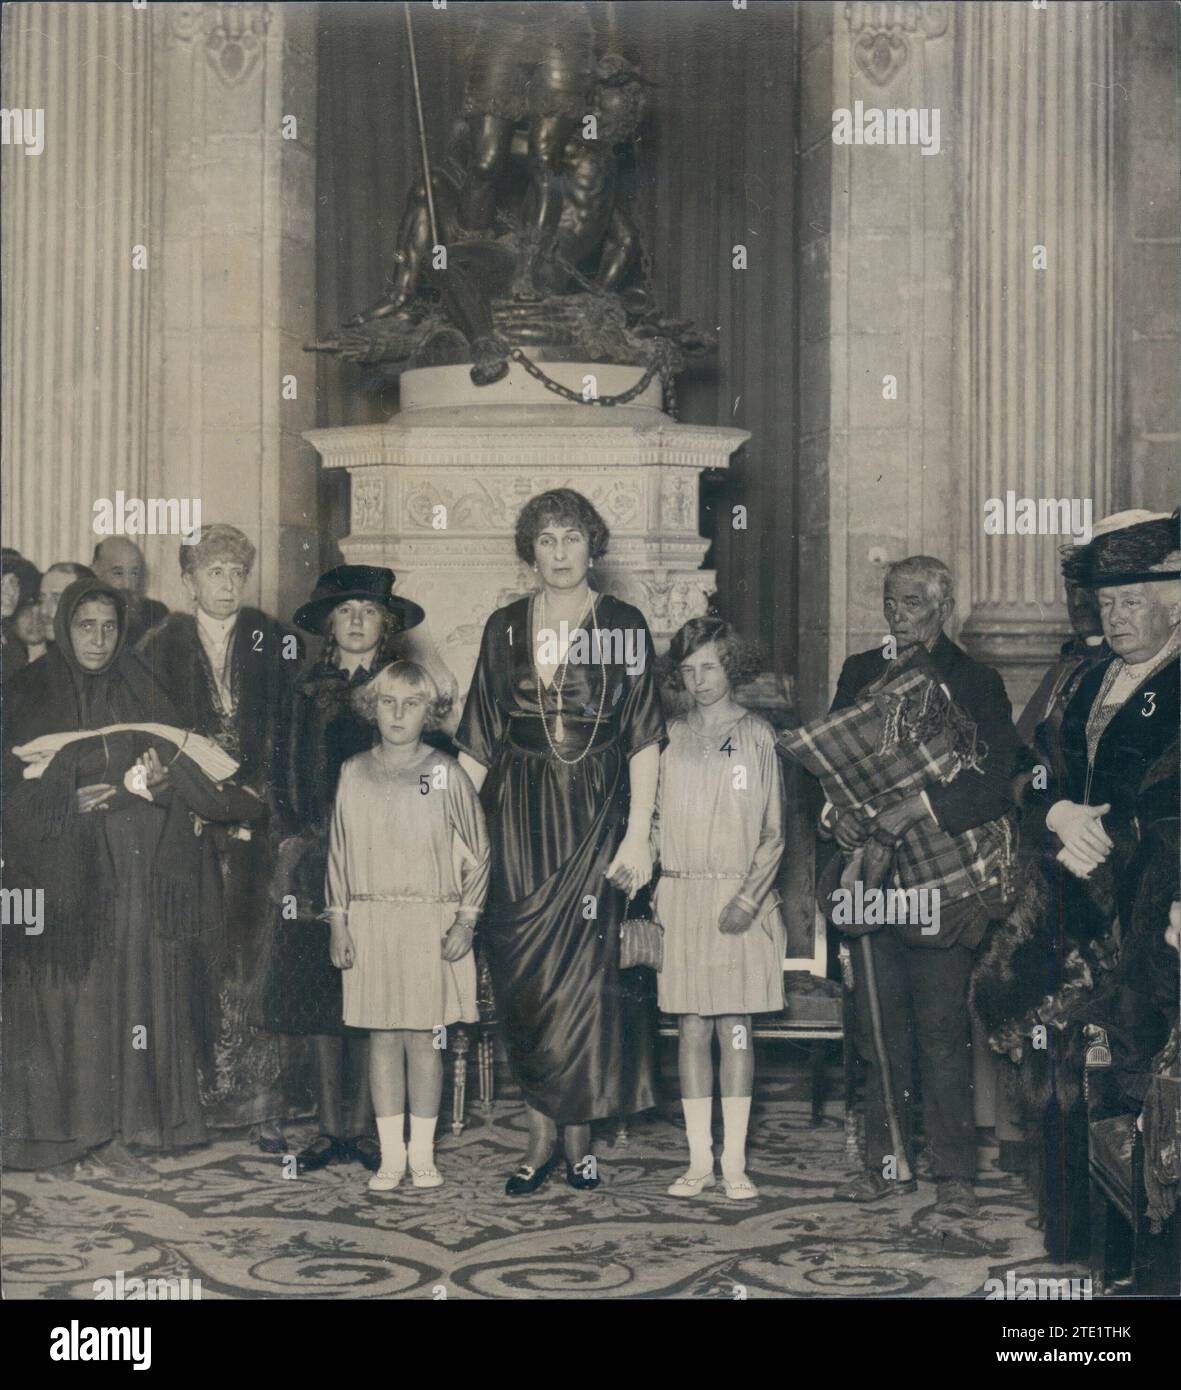 11/30/1919. Madrid. In the Column Hall of the Royal Palace. Ss.Mm. Queens Doña Victoria (1) and Doña María Cristina (2), with Ss.Aa.Rr. the Infantas Doña Isabel (3), Doña Beatriz (4) and Doña Cristina (5), in the distribution to the Poor of the Garments from Santa Victoria's wardrobe. Credit: Album / Archivo ABC / Julio Duque Stock Photo